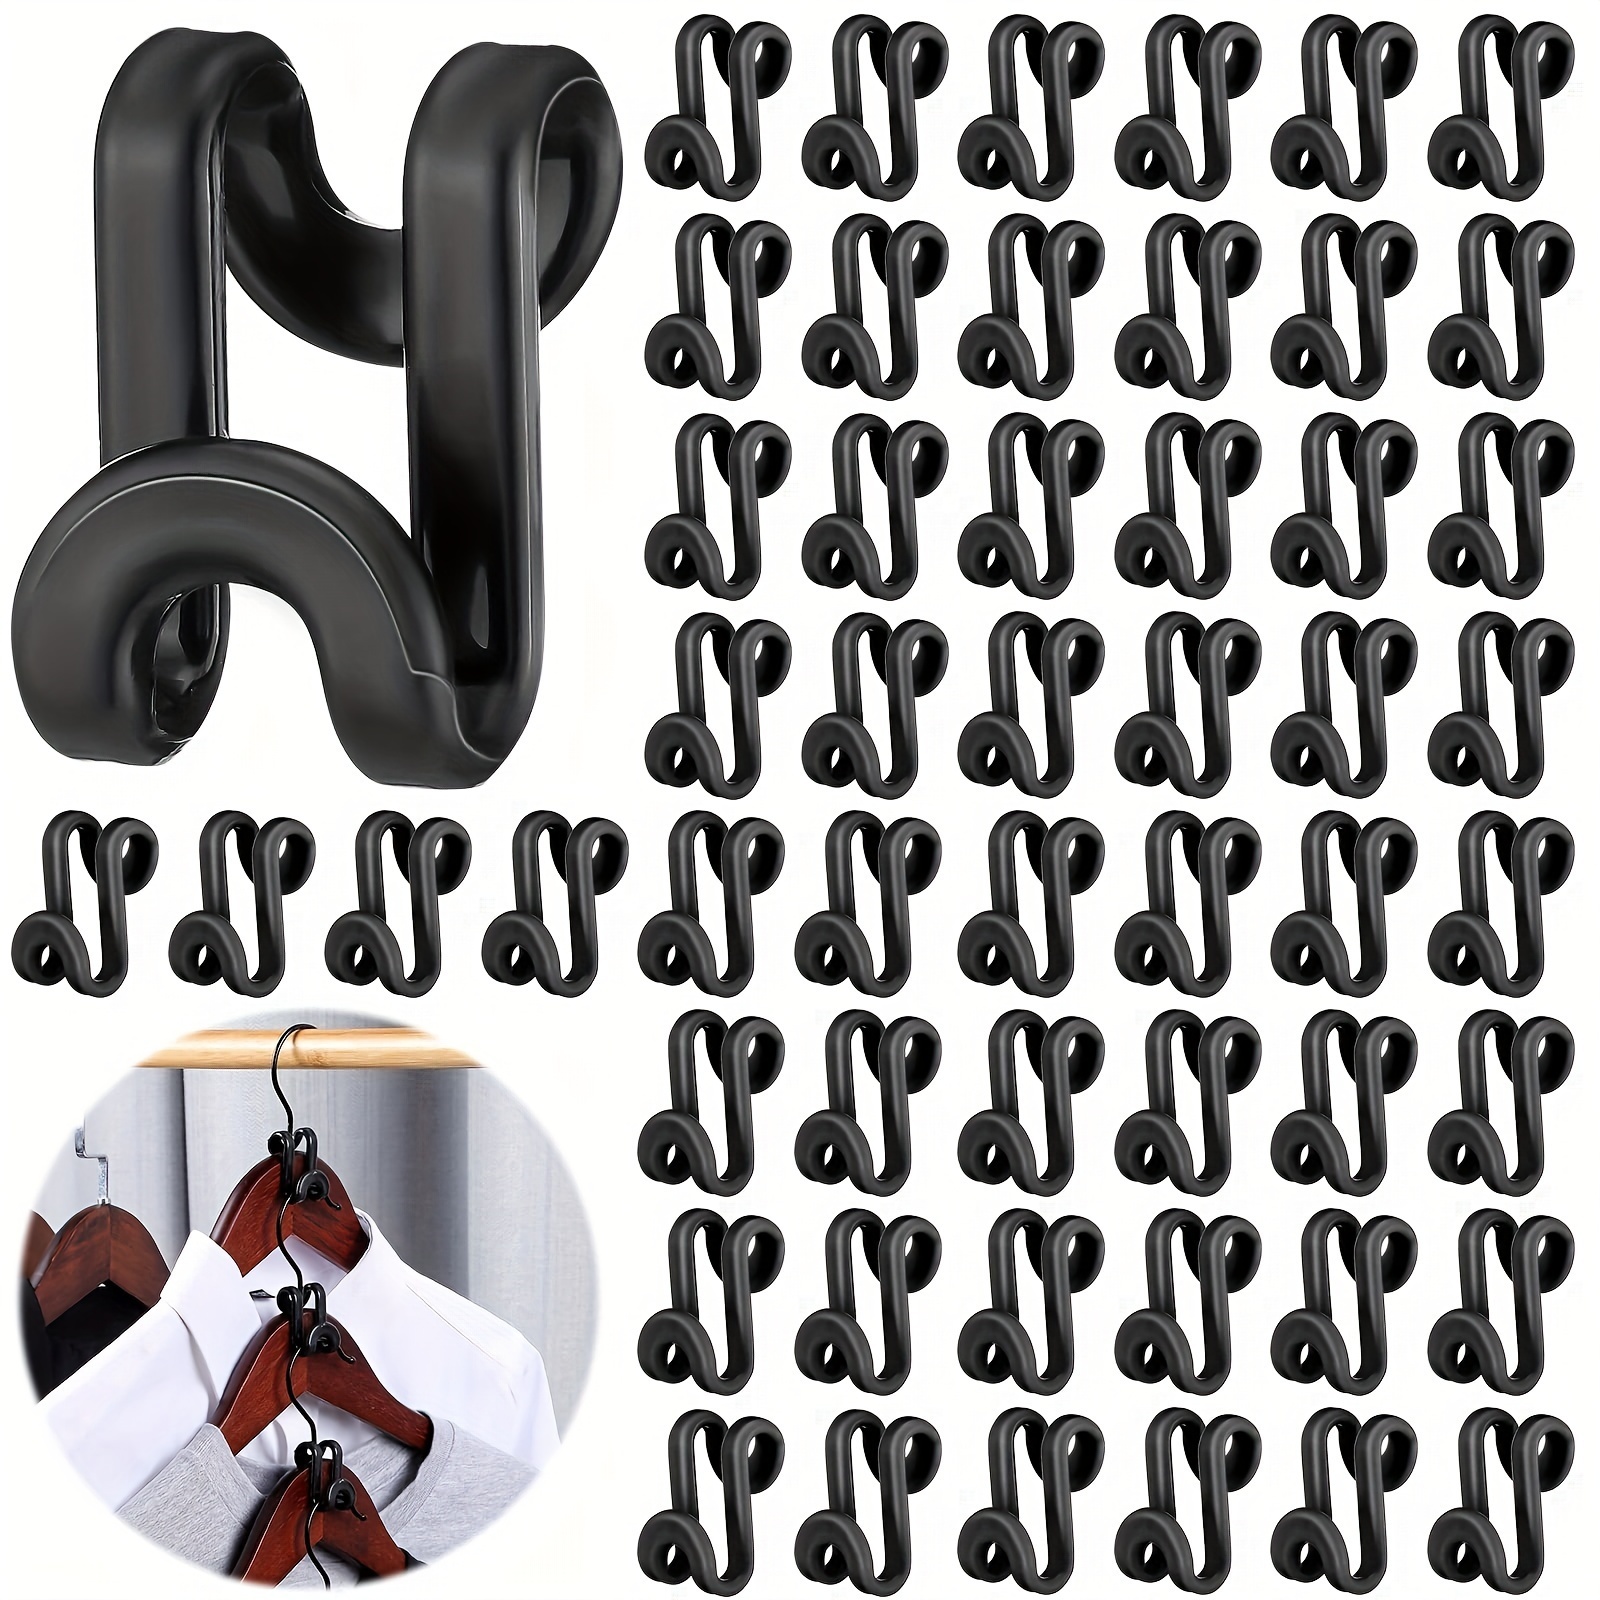 

20pcs Heavy Duty Clothes Hanger Connector Hooks - Space Saving Cascading Connection Hooks For Organizer Closet